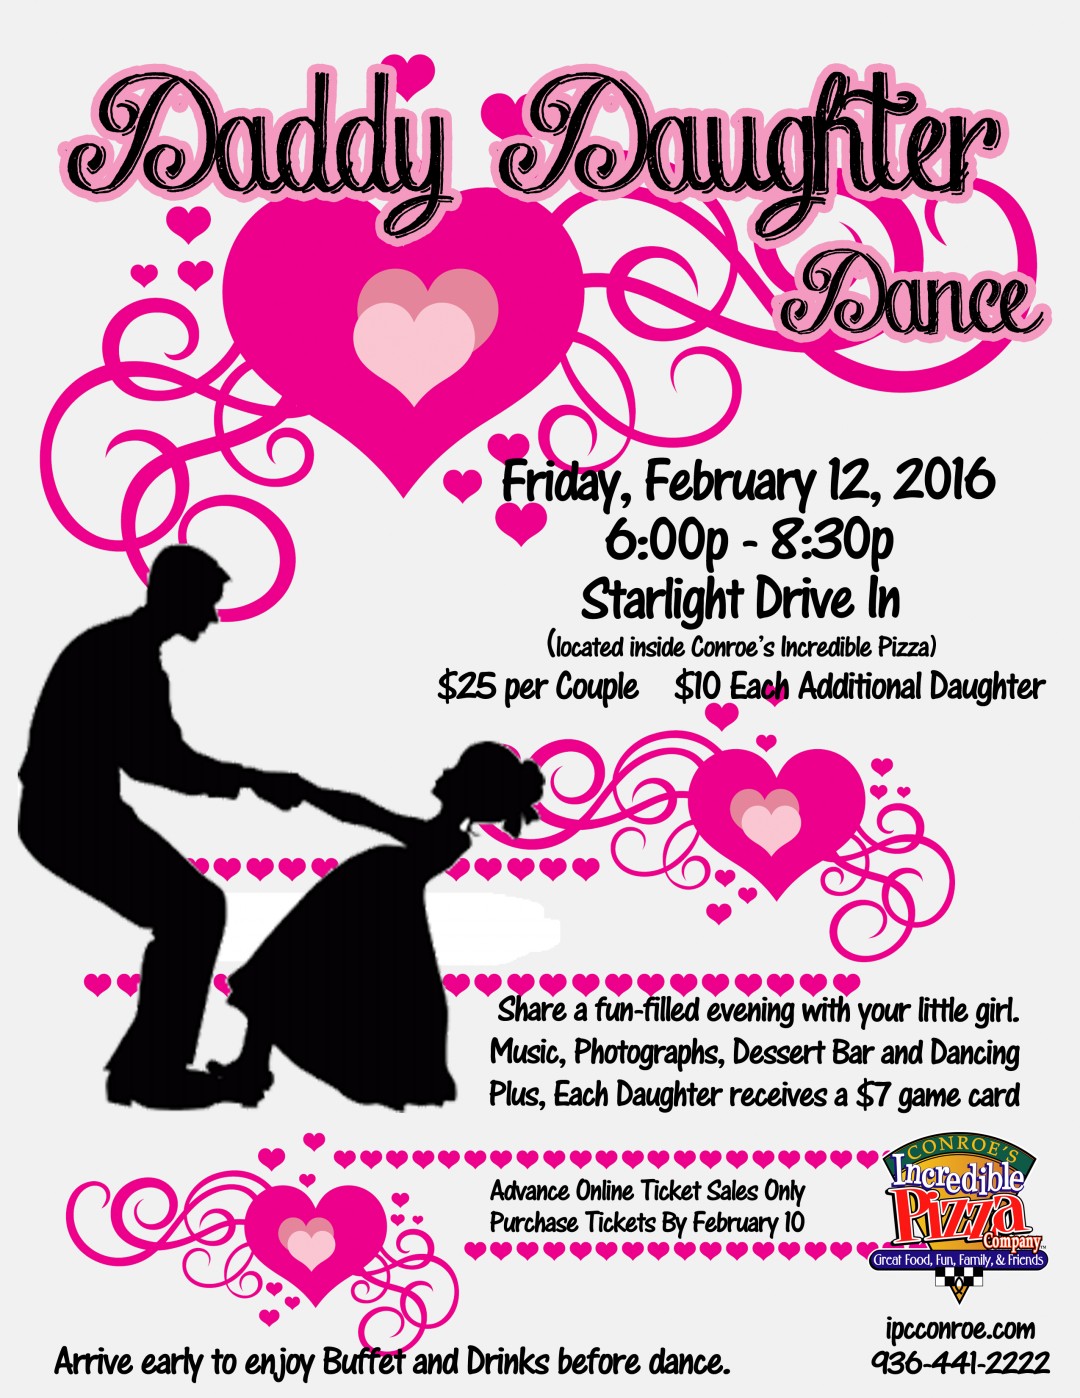 father-daughter-dance-flyer-incredible-pizza-company-enjoy-our-huge